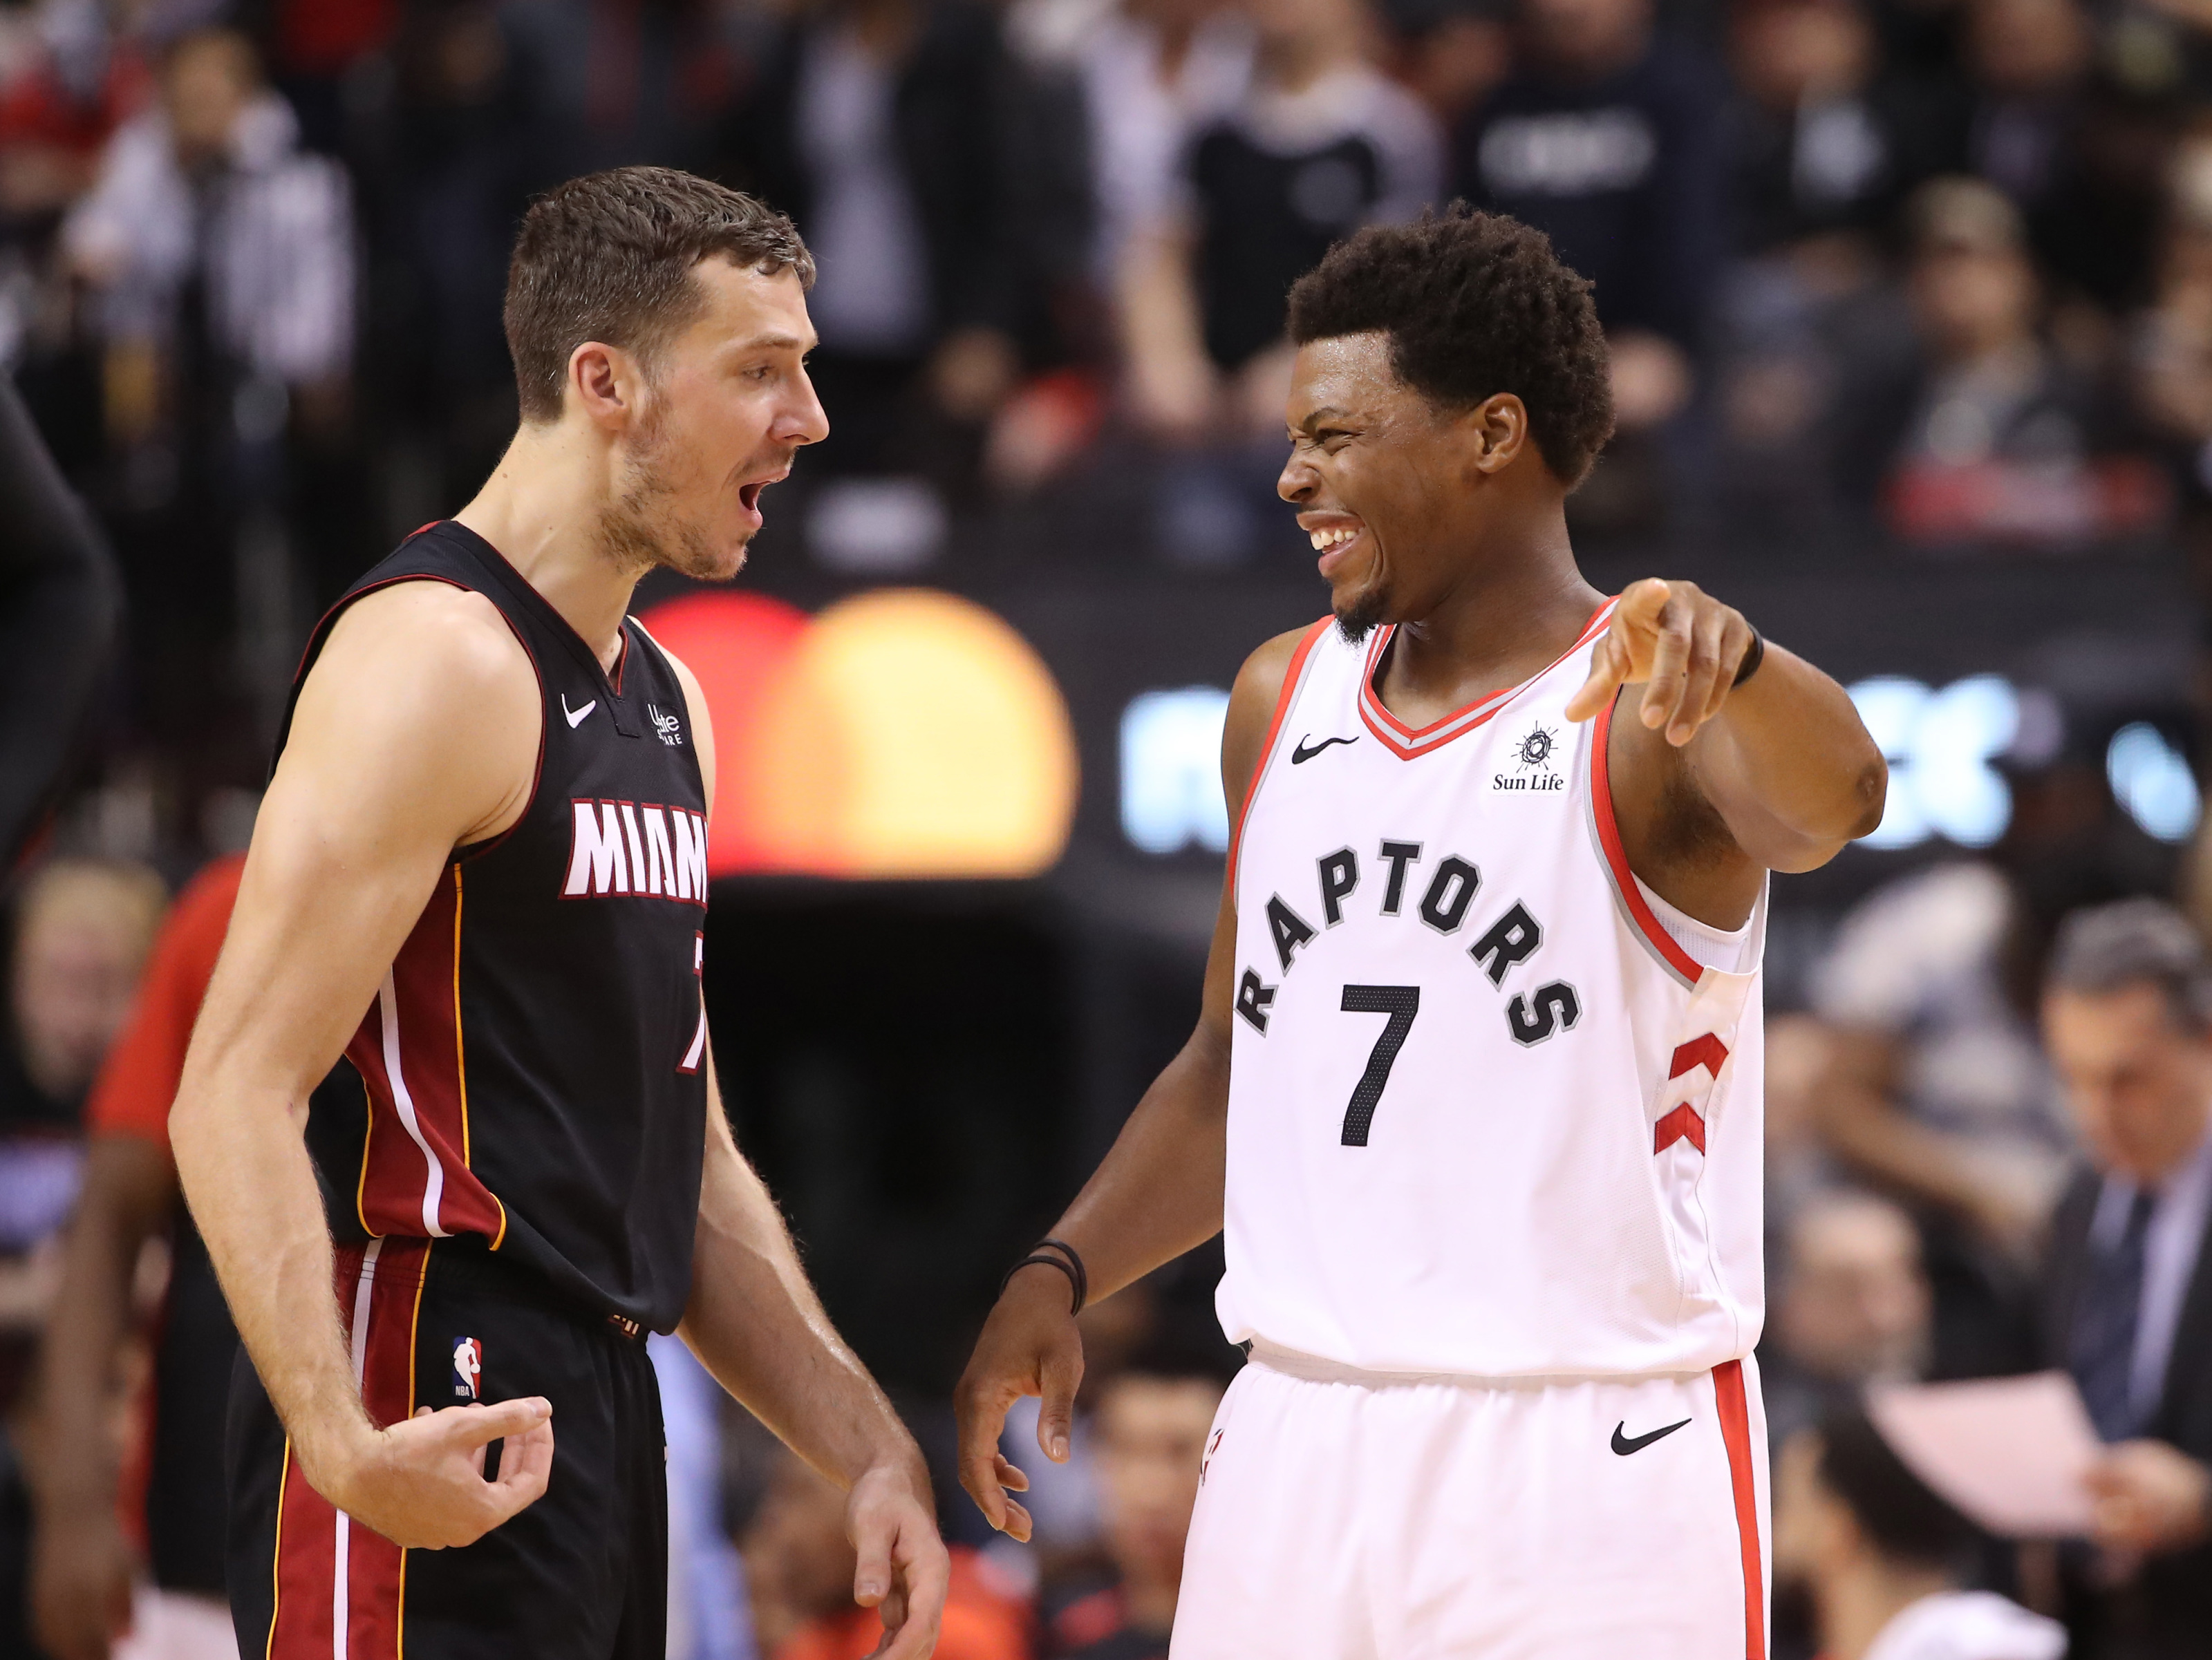 TORONTO, ON - APRIL 07: Kyle Lowry #7 (R) of the Toronto Raptors shares a laugh with Goran Dragic #7 (L) of the Miami Heat at Scotiabank Arena on April 7, 2019 in Toronto, Canada. NOTE TO USER: User expressly acknowledges and agrees that, by downloading and or using this photograph, User is consenting to the terms and conditions of the Getty Images License Agreement. (Photo by Tom Szczerbowski/Getty Images)